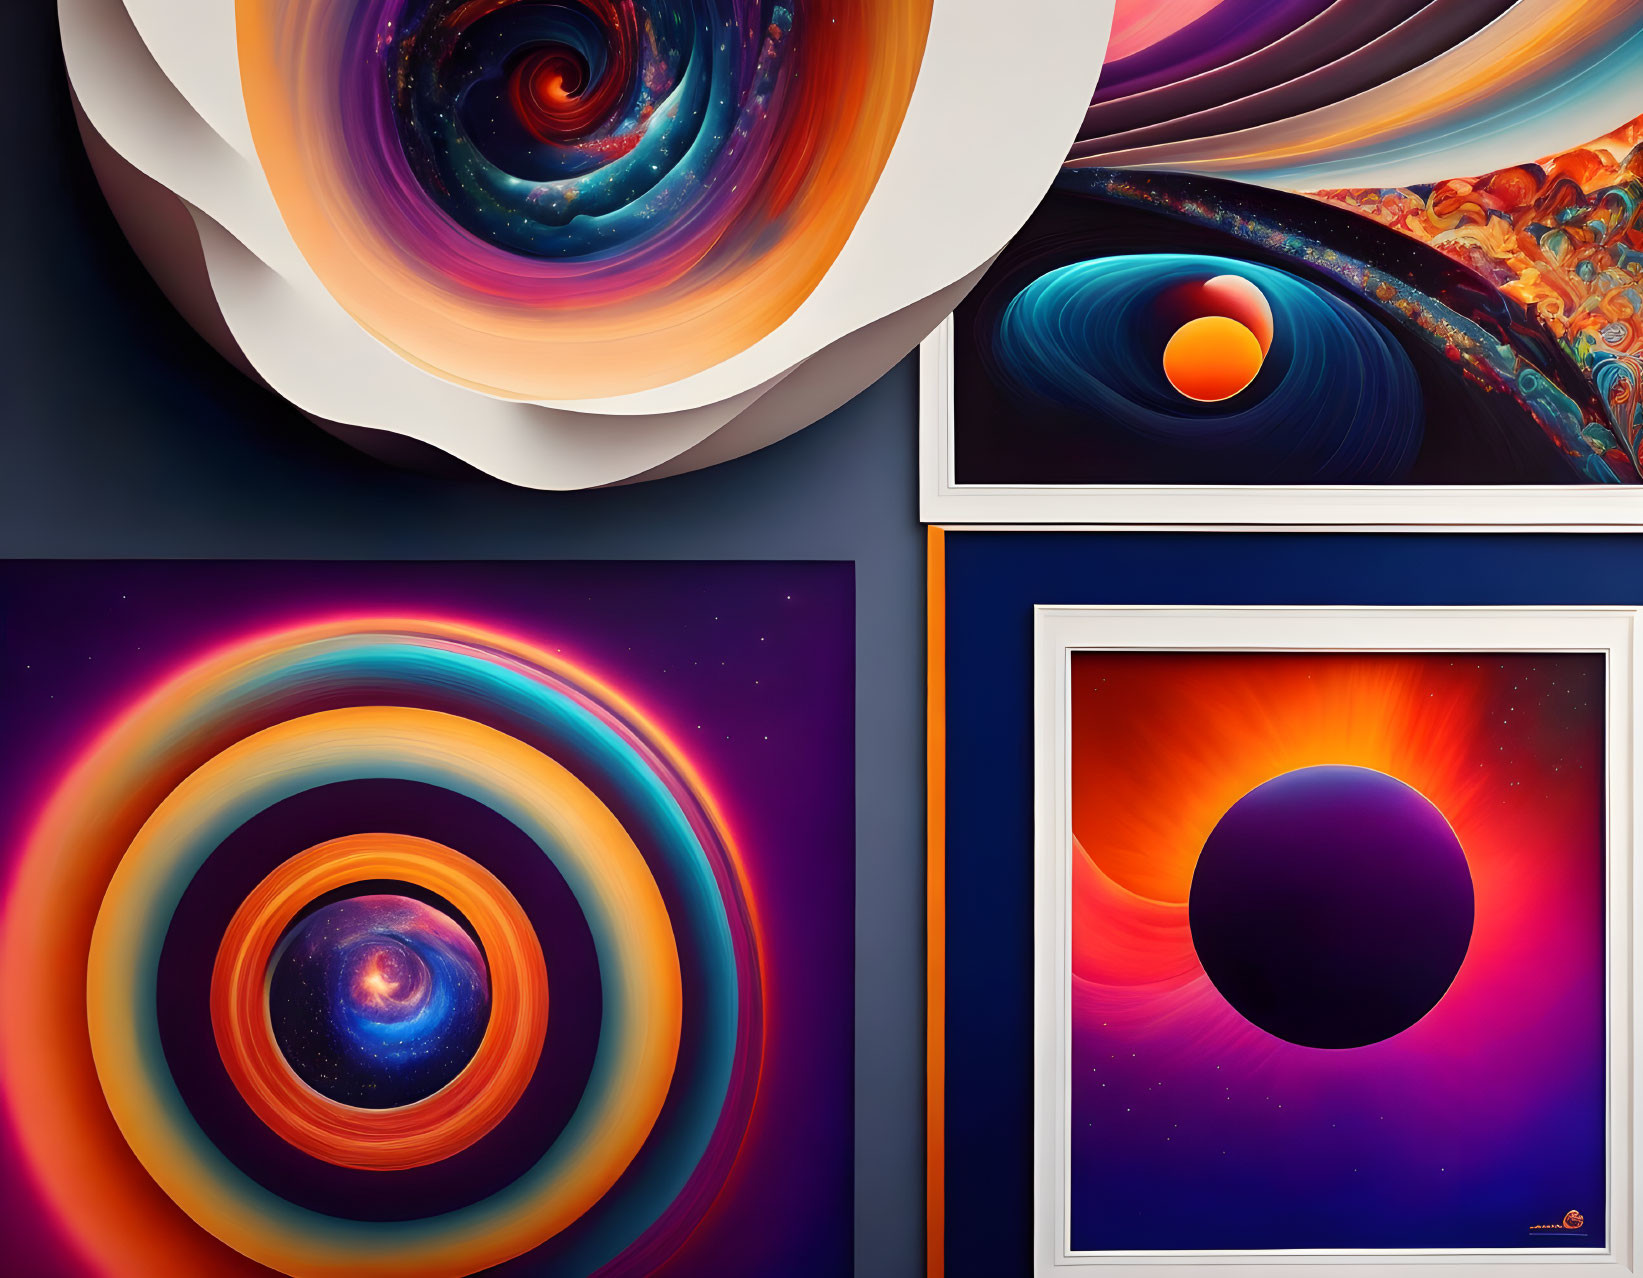 Abstract Digital Artworks: Vibrant Swirls & Circular Patterns in Cosmic Colors